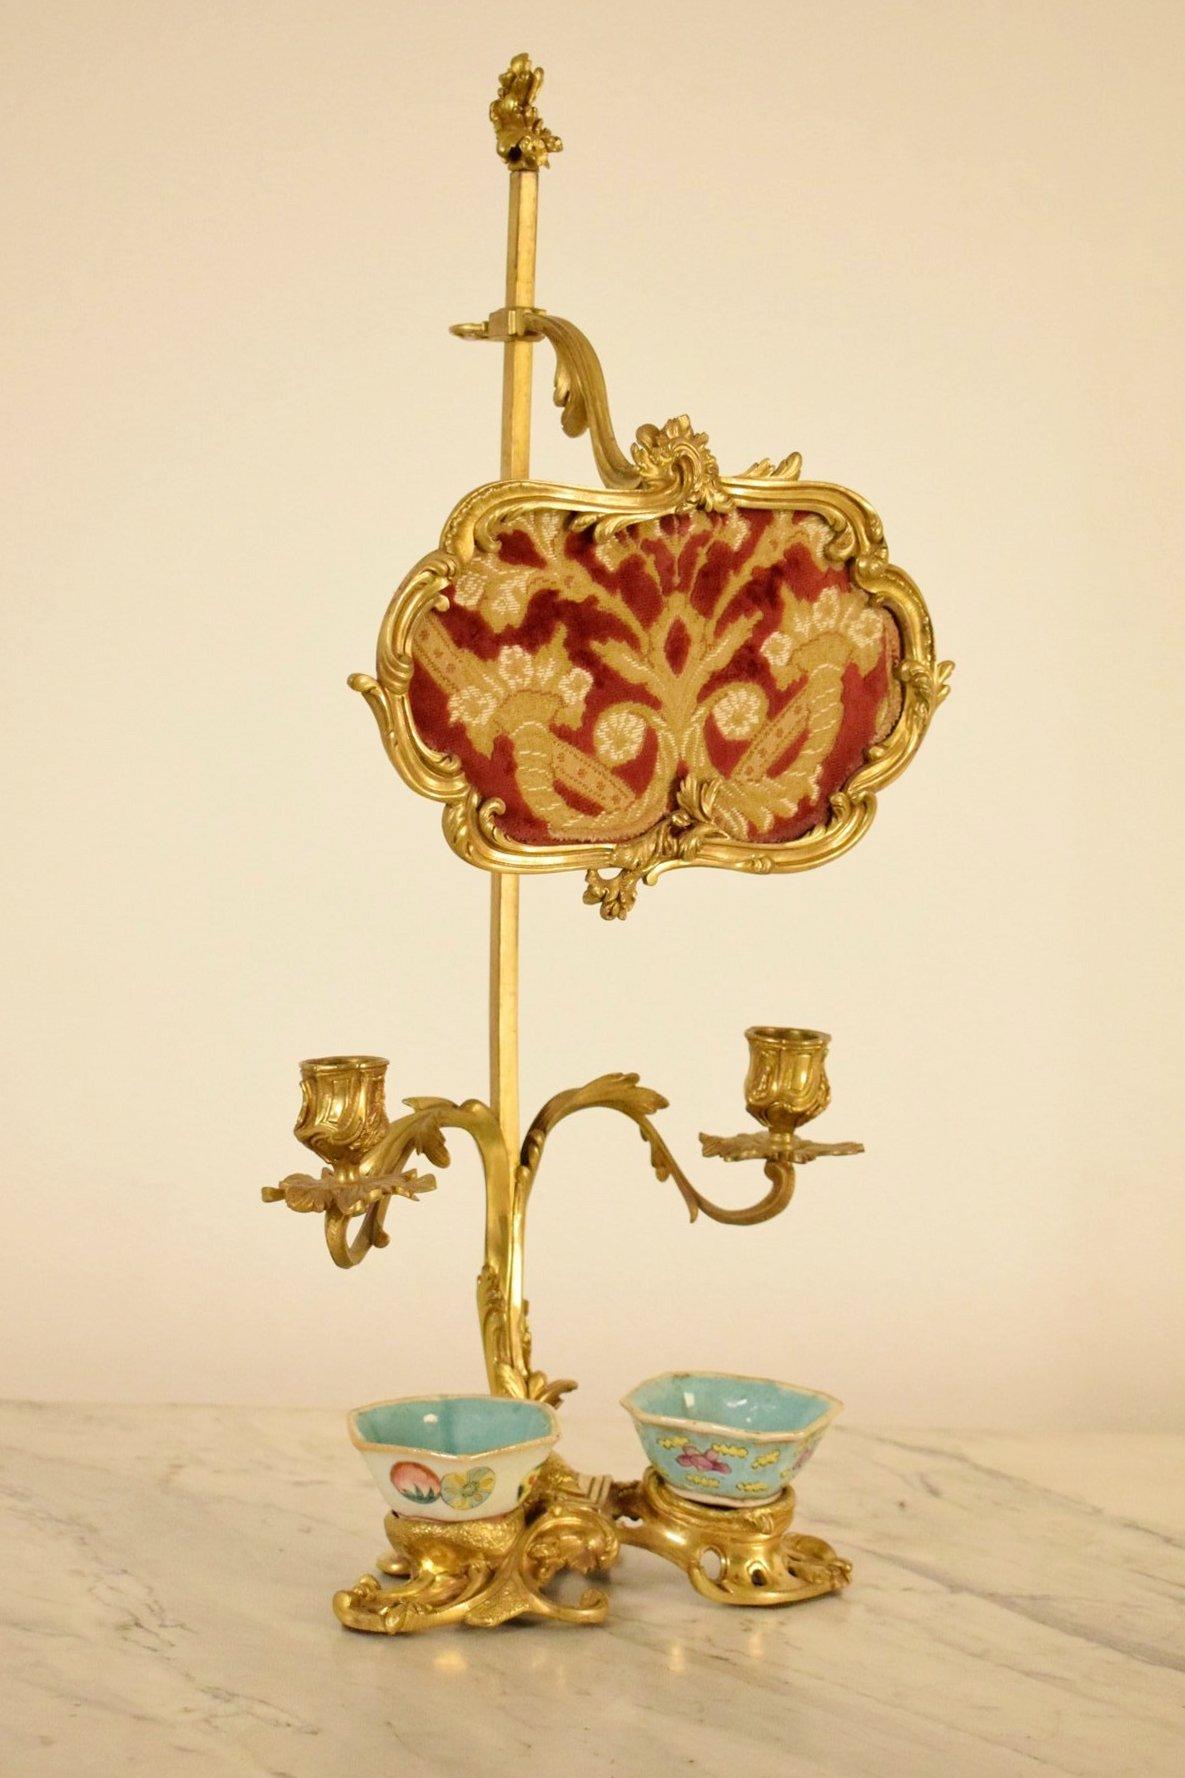 19th Century French Gilt Bronze Desk Candlestick with Cinese Ceramic Inkwell  (Louis XV.)